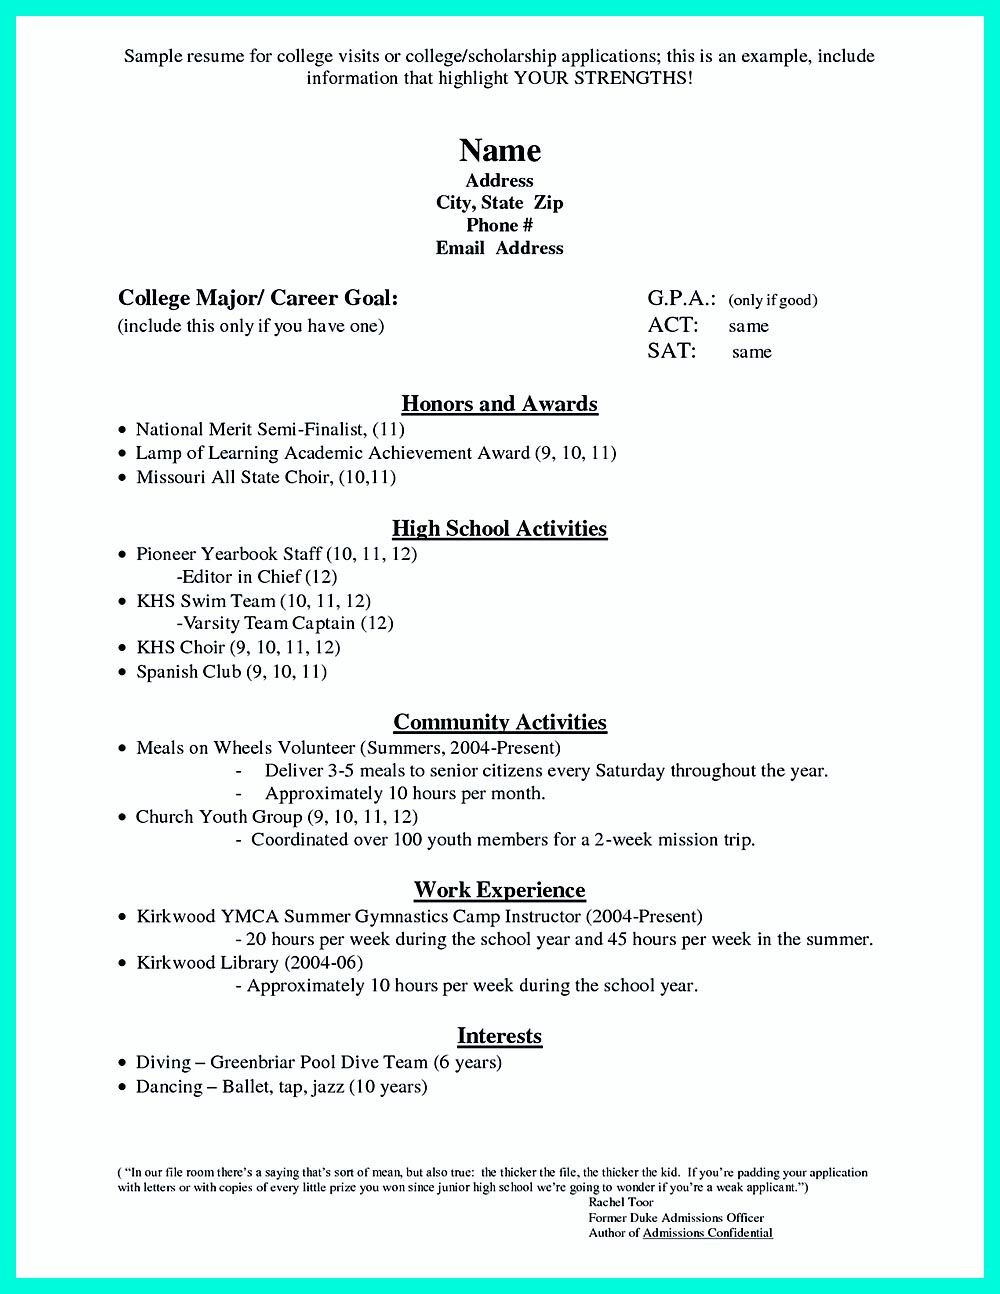 Sample Resume for Dance Team Captain Pin On Resume Sample Template and format